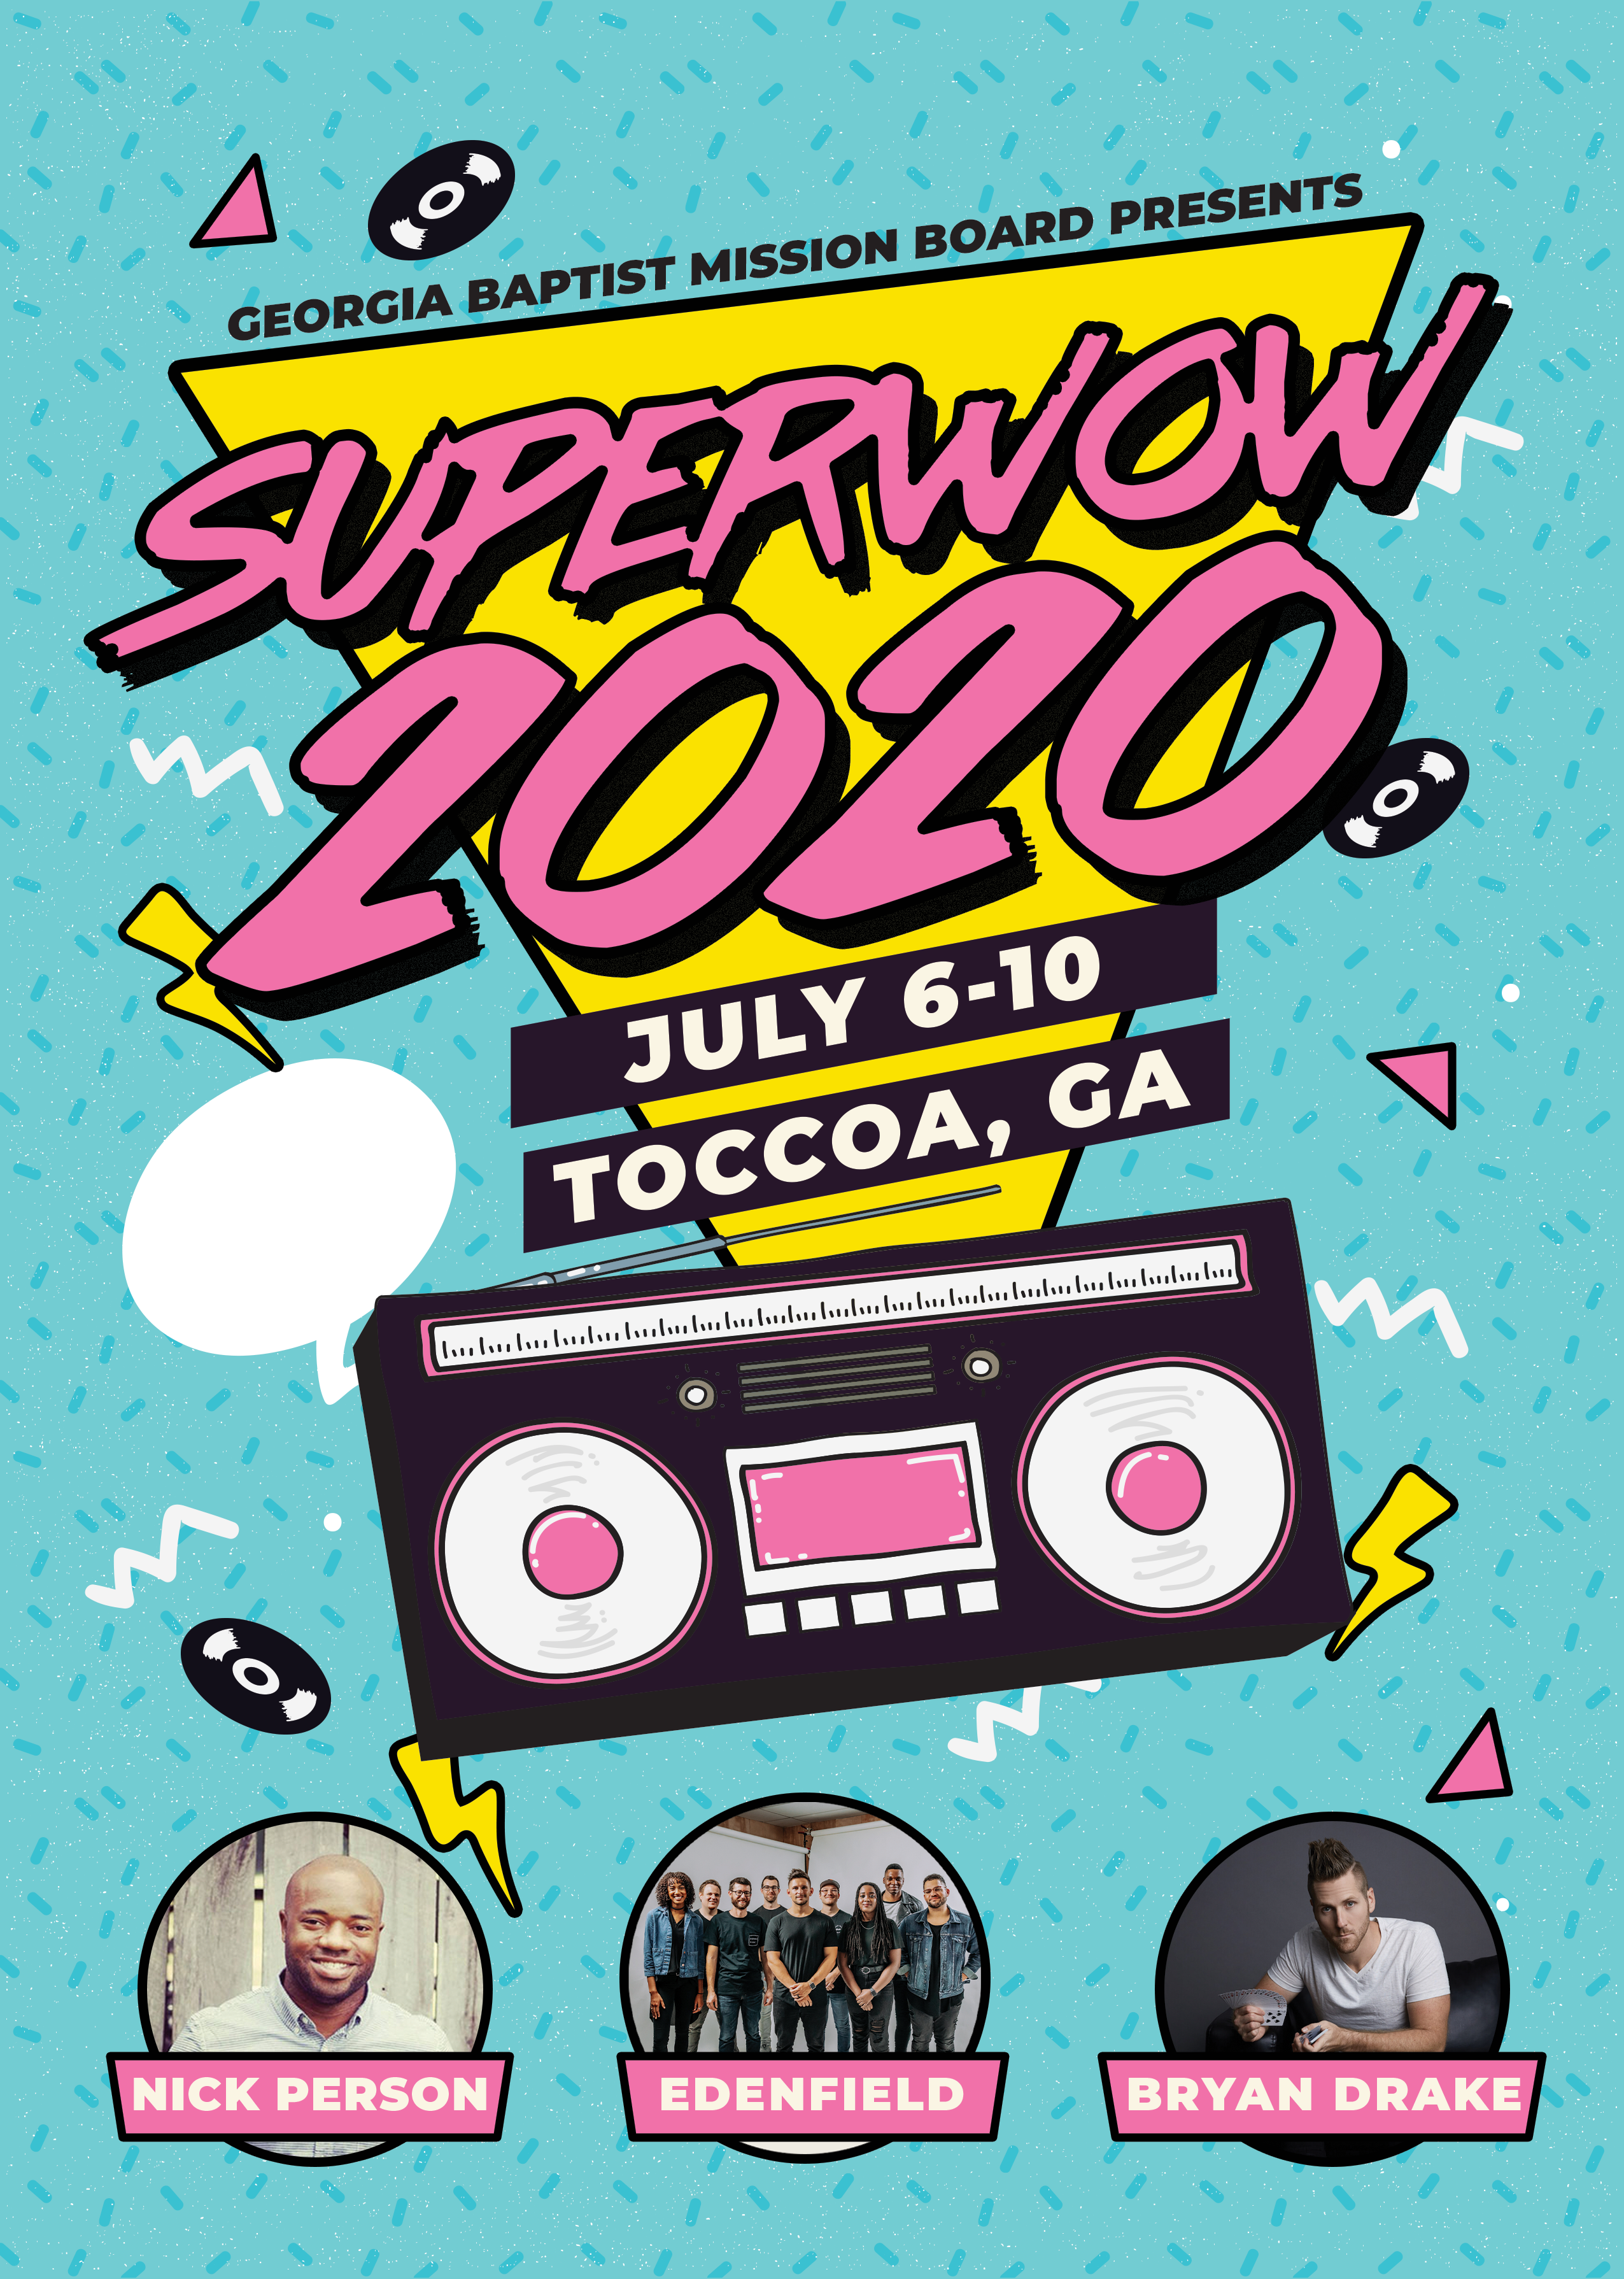 poster for toccoa july superwow 2020